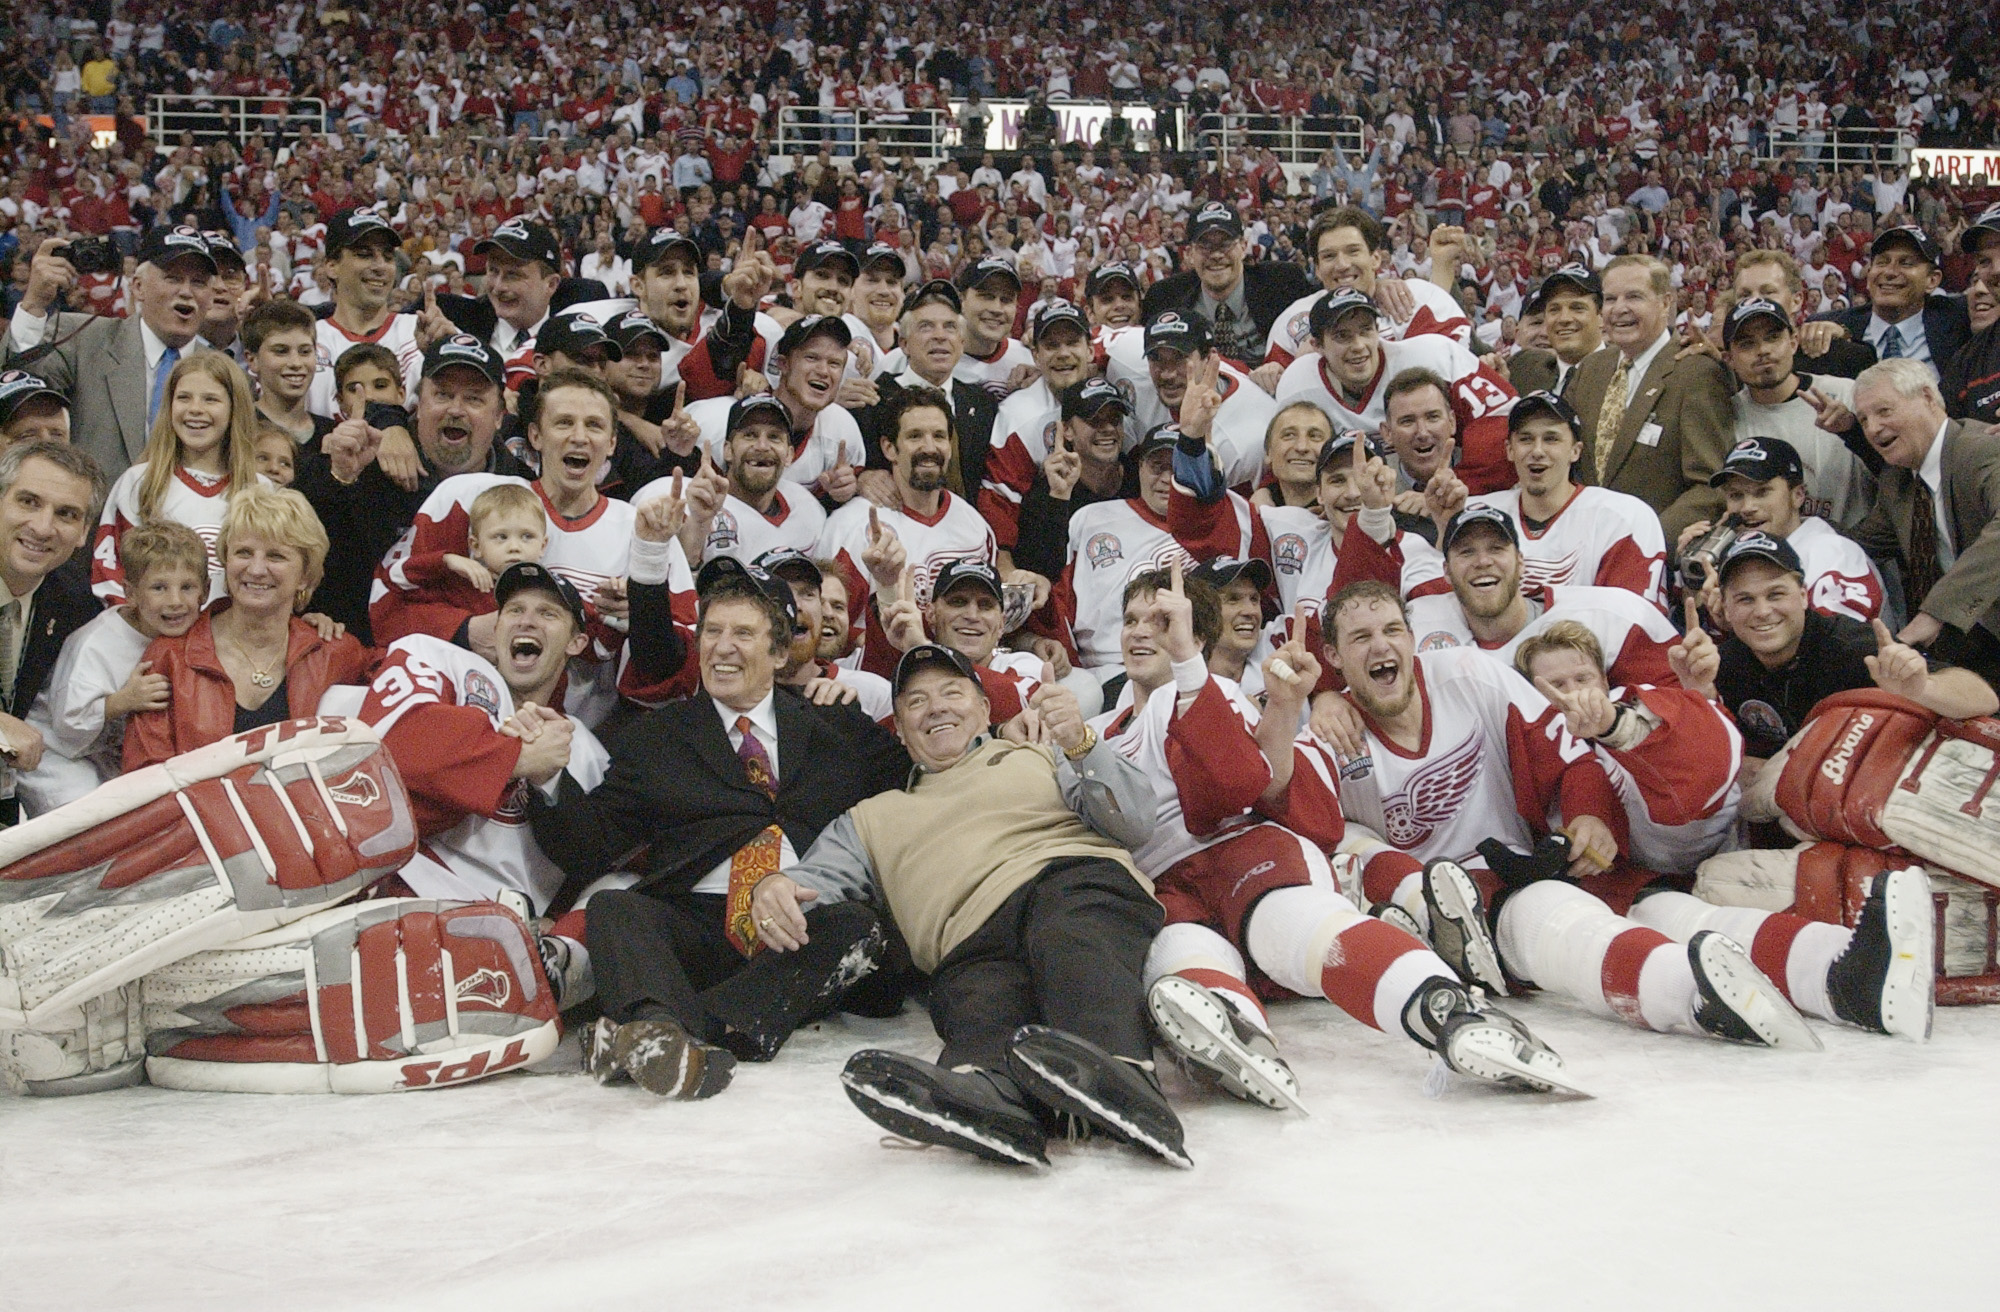 DETROIT, MI - JUNE 13:  The Detroit Red Wings take a team photo while celebrating winning the Stanley Cup after eliminating the Carolina Hurricanes during game five of the NHL Stanley Cup Finals on June 13, 2002 at the Joe Louis Arena in Detroit, Michigan